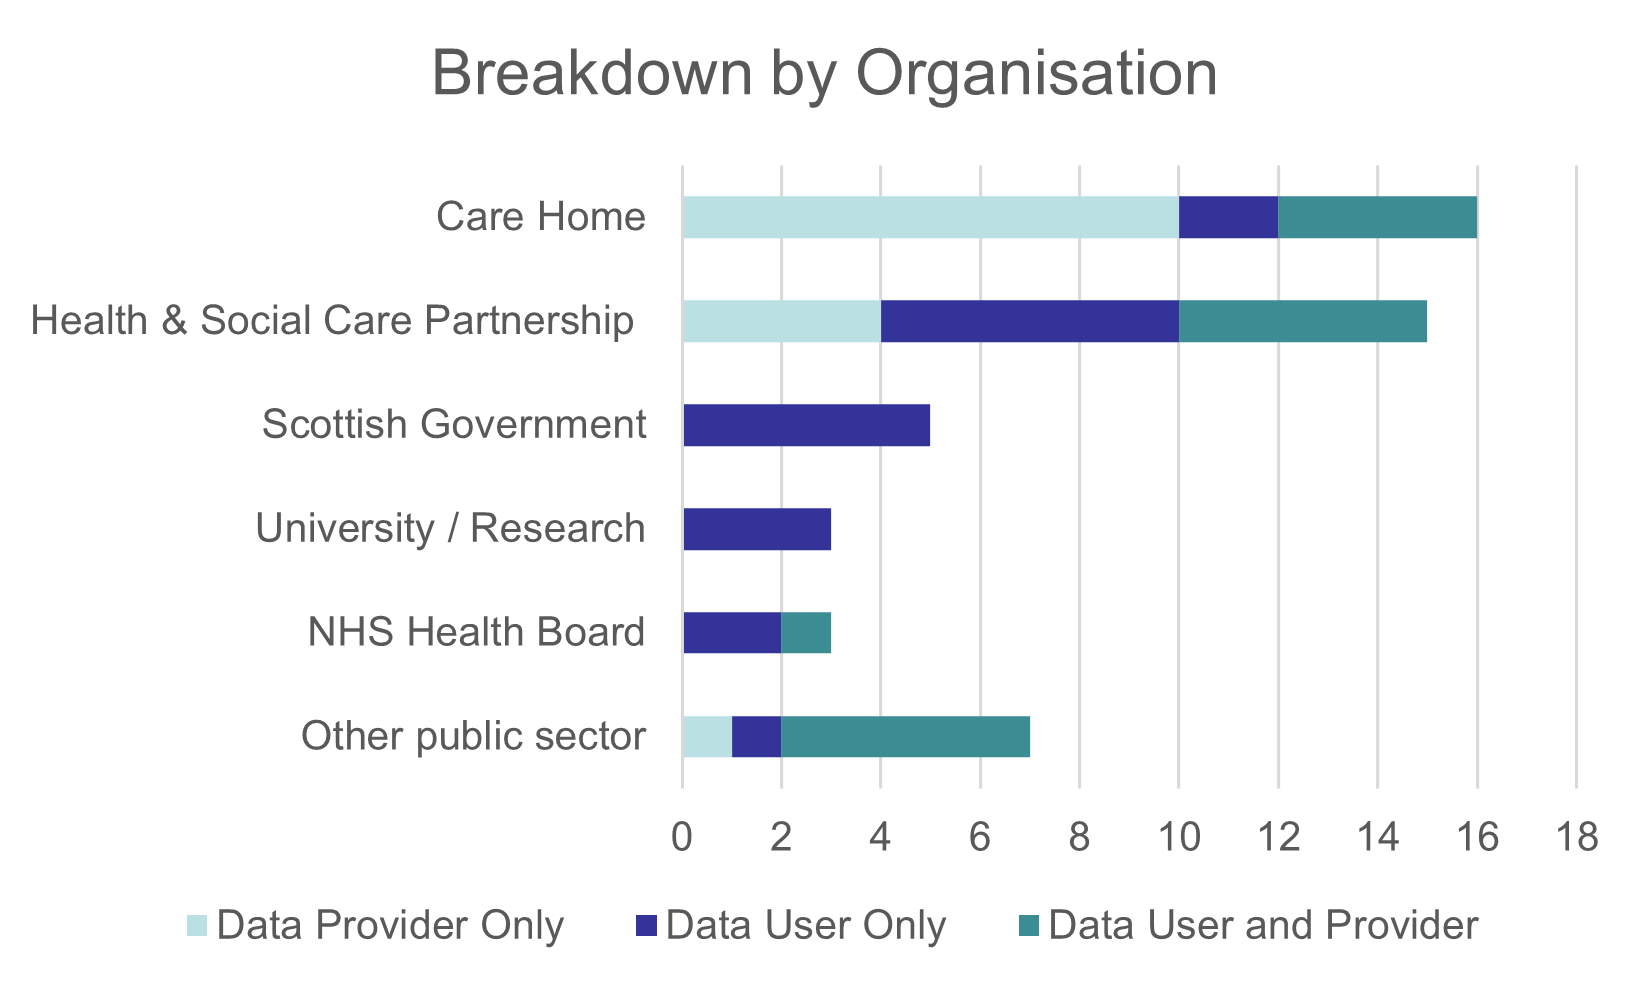 This chart shows the breakdown of the organisation chart by whether the individual was a data user, data provider or both. Care Homes and HSCP’s had respondents in all three categories. Scottish Government and University /research orgs were solely data users.